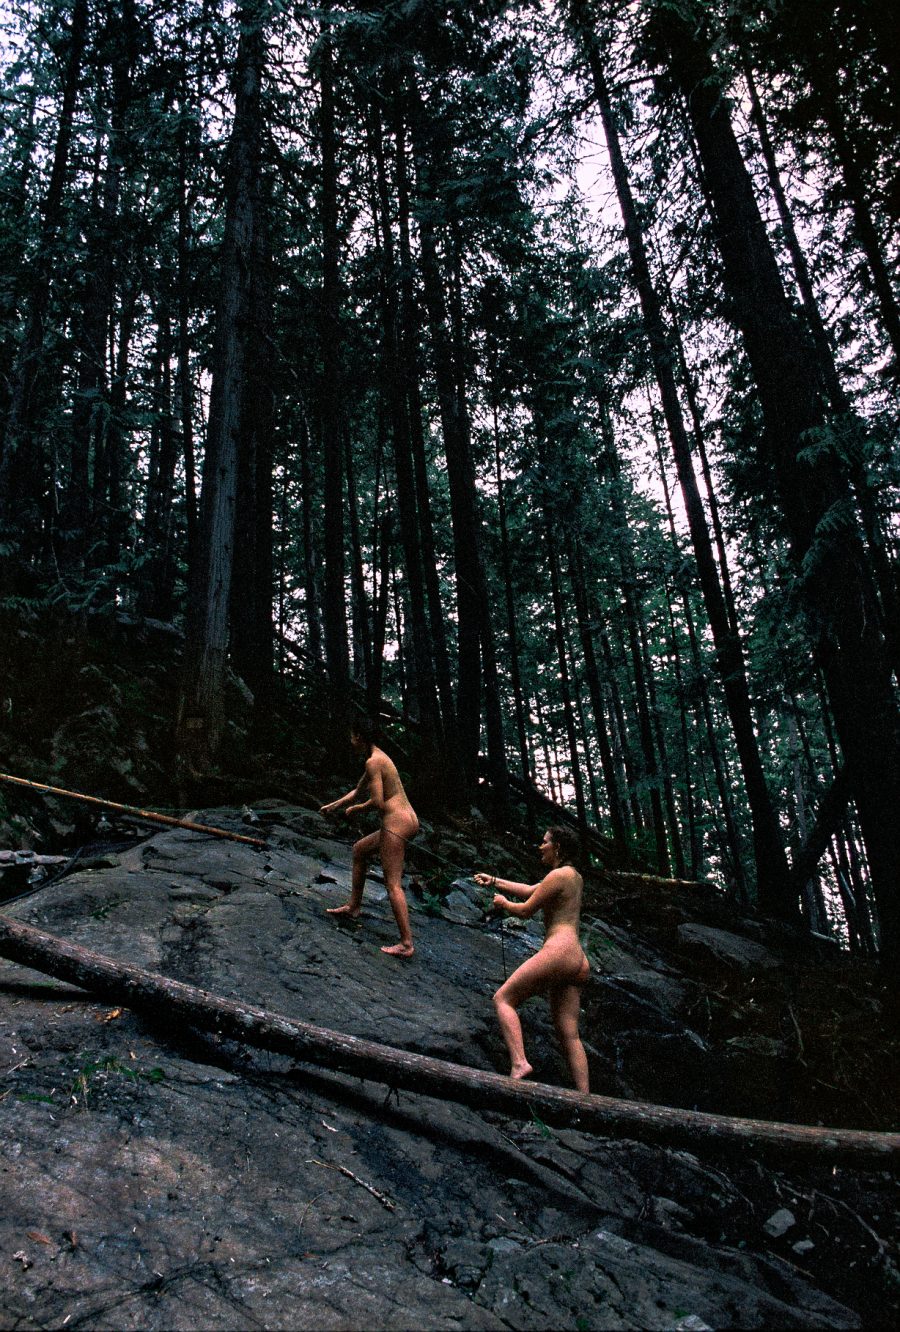 Two naked people exploring a forest.